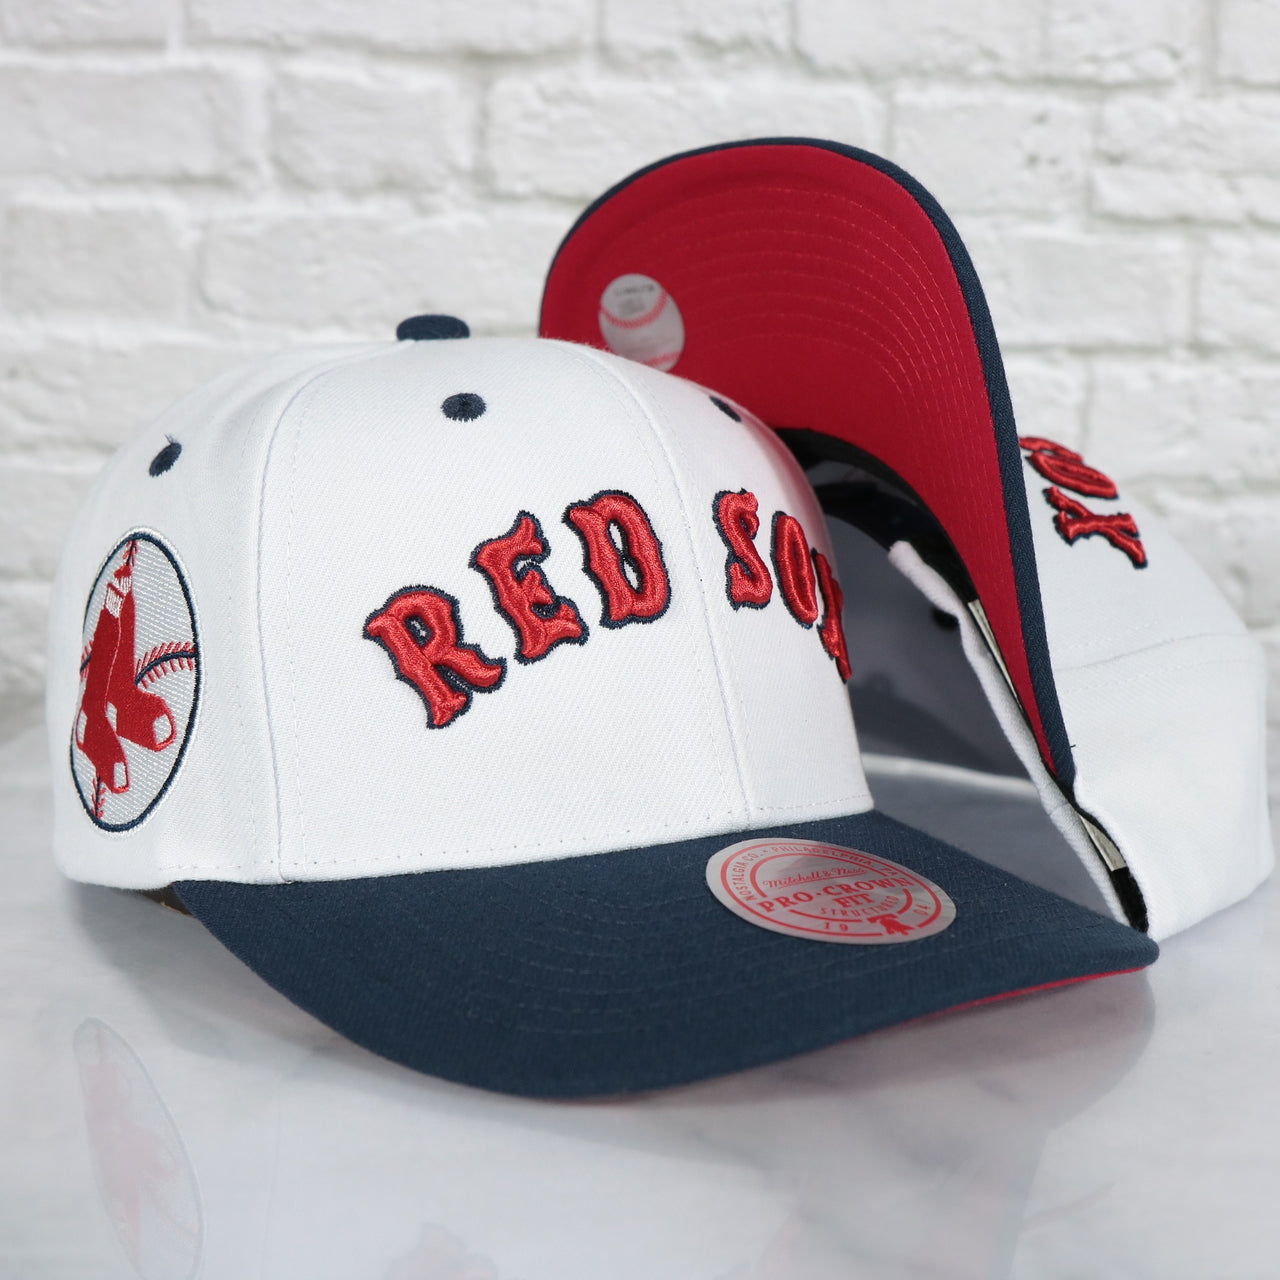 Boston Red Sox Cooperstown "Red Sox" Jersey Script 1961 Red Sox logo side patch Evergreen Pro | White/Navy Snapback Hat